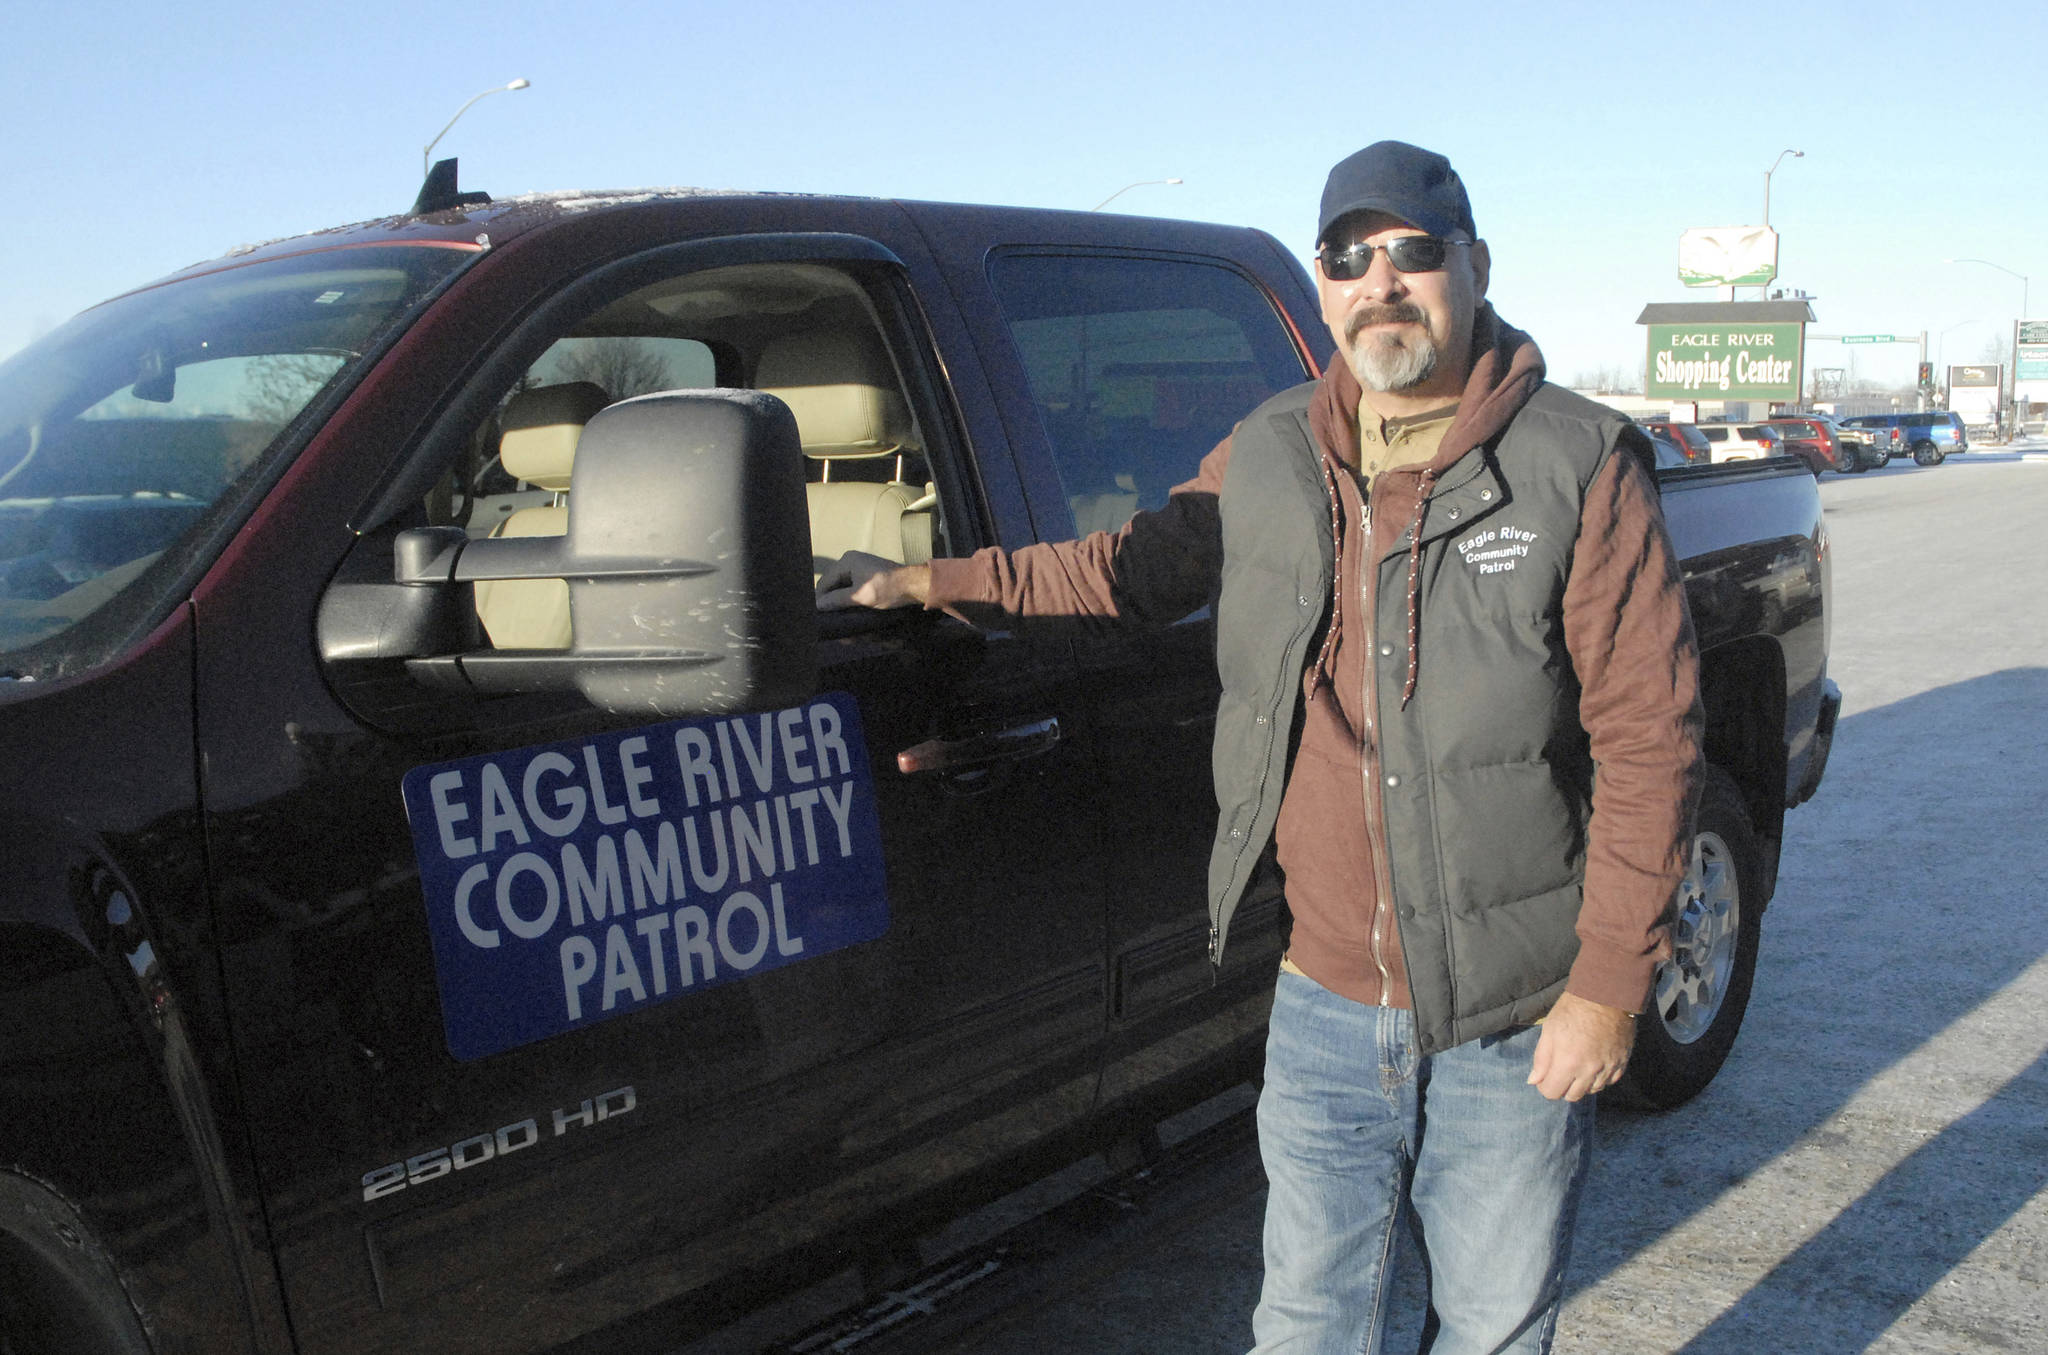 In this Nov. 13, 2017, photo, Cliff Cook stands next to his pick-up truck in downtown Eagle River, Alaska. Cook, who started the Eagle River Community Patrol in early November, 2017, said the patrol is needed due to a recent increase in crime in the area. (Matt Tunseth/Chugiak-Eagle River Star via AP)